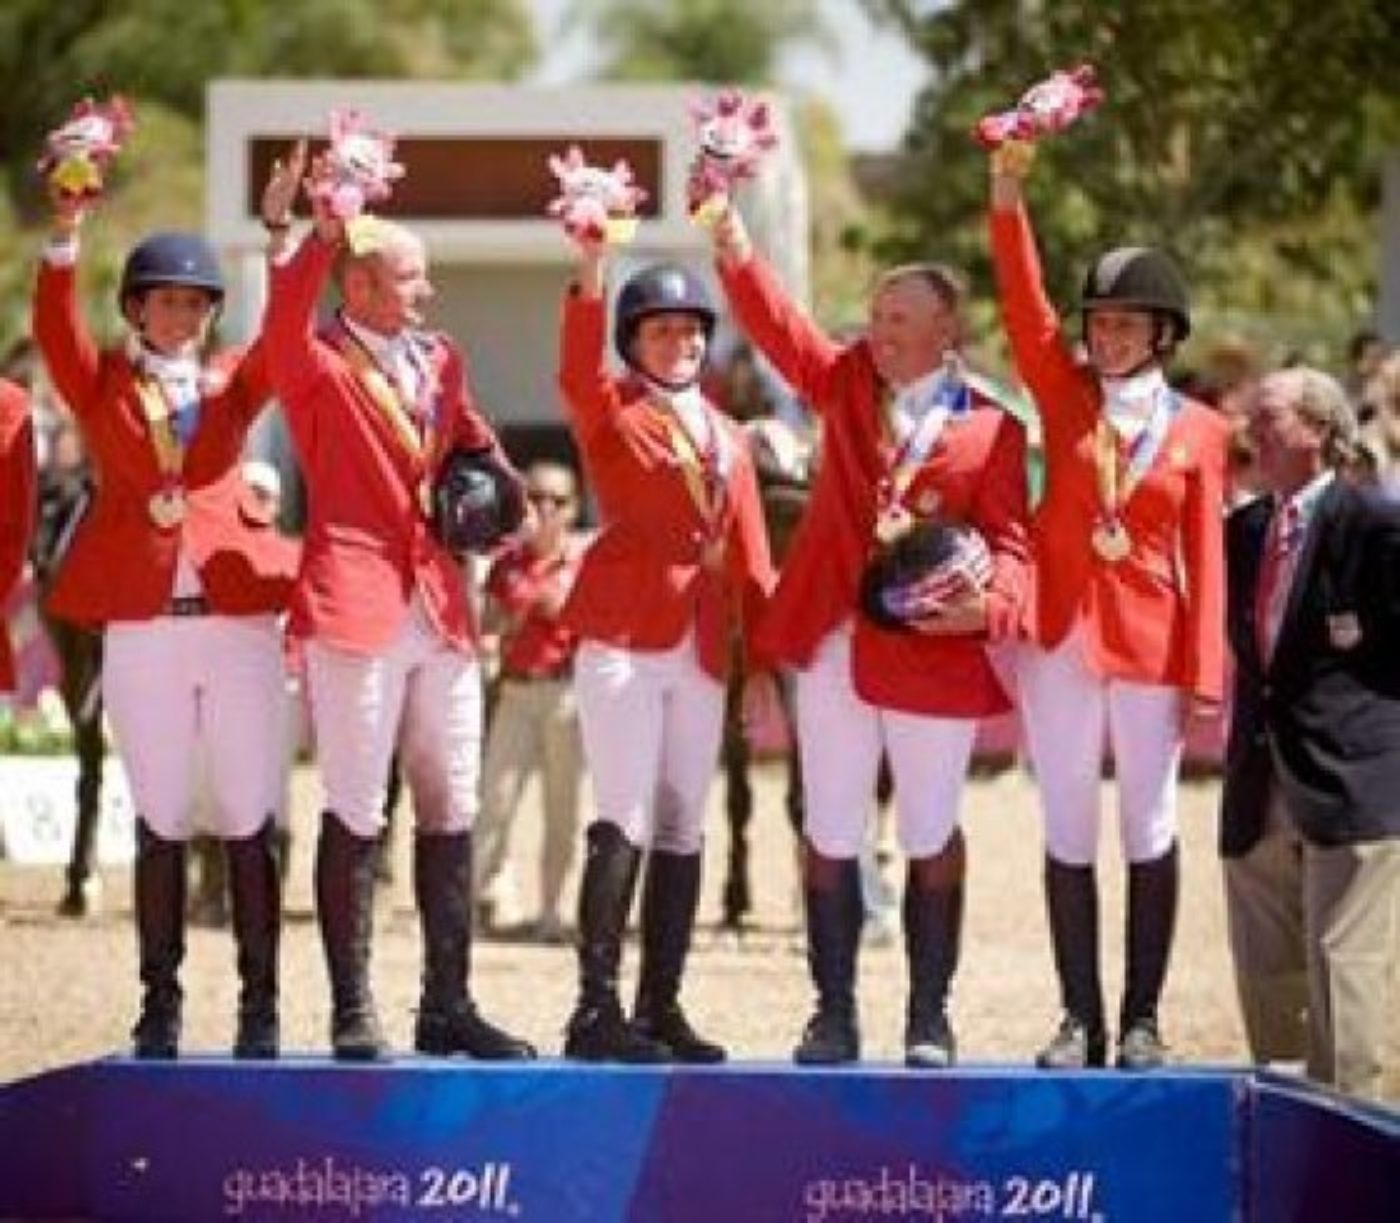 Ten Medals for Equestrian Team USA at the 2011 Pan American Games